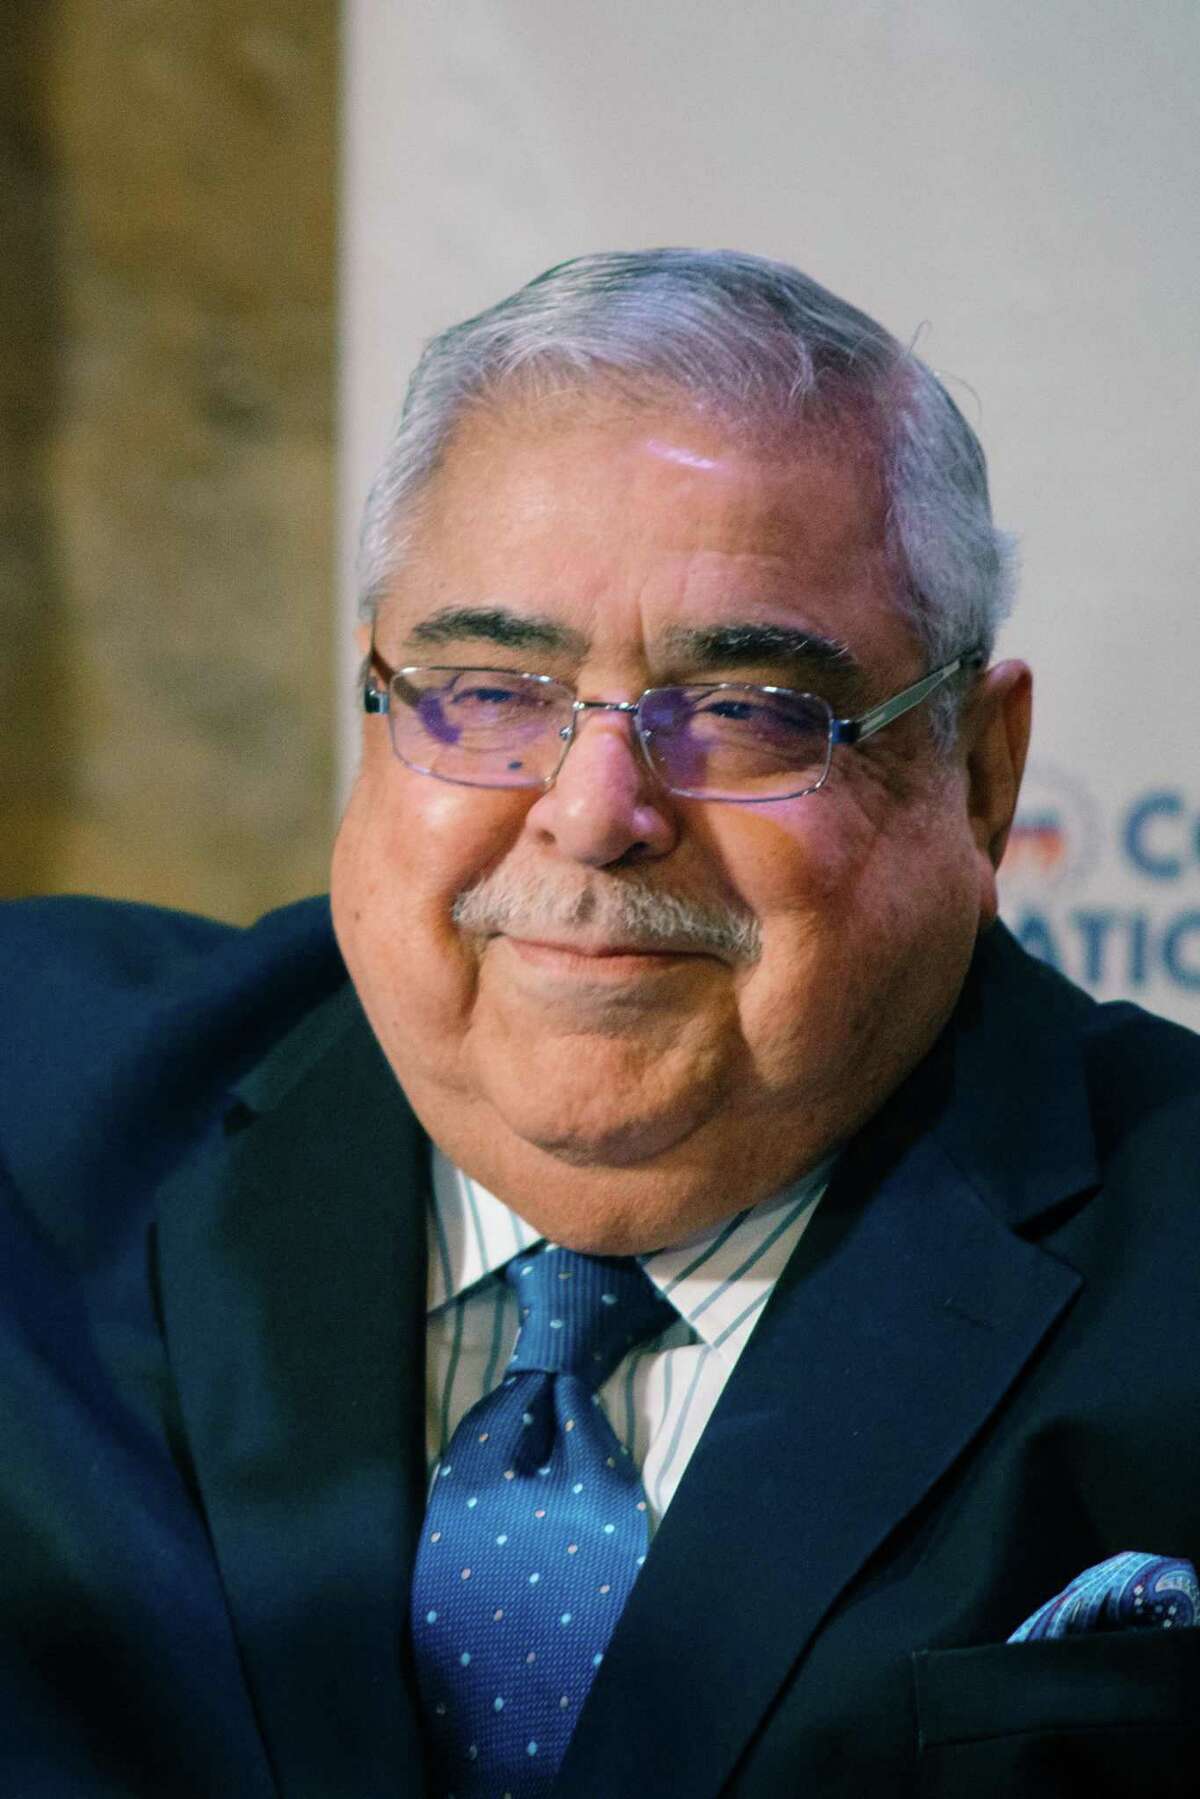 Paul Elizondo died unexpectedly Thursday morning. Elizondo was roundly acknowledged as one of San Antonio’s major power brokers over the decades. Keep clicking through to see the most notable Houston-area deaths of 2018.